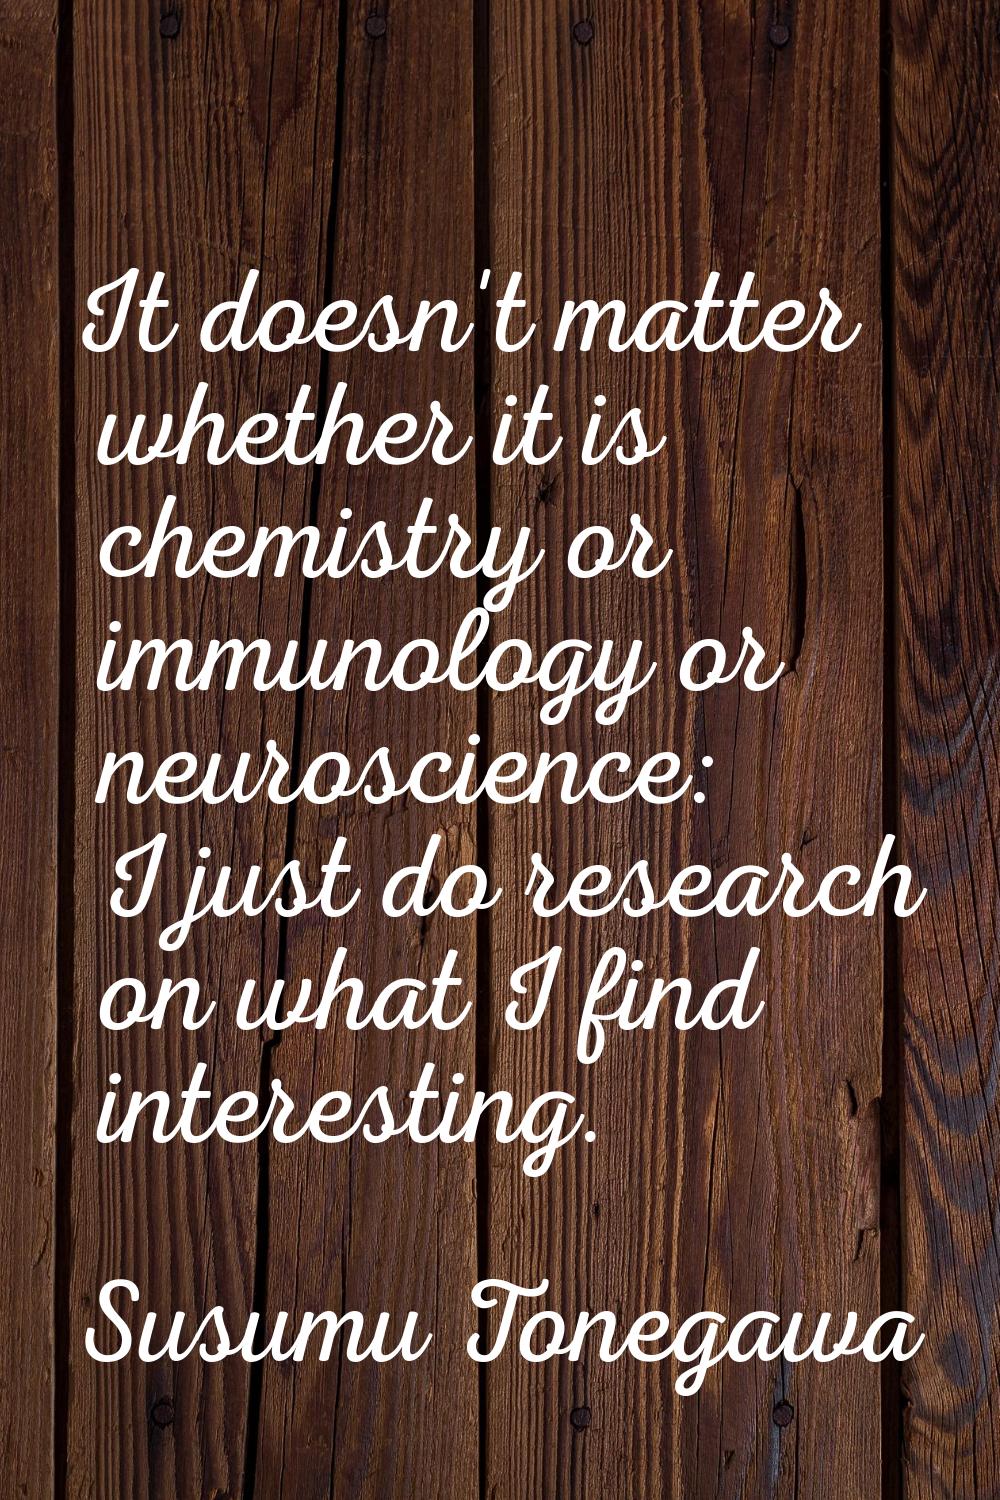 It doesn't matter whether it is chemistry or immunology or neuroscience: I just do research on what